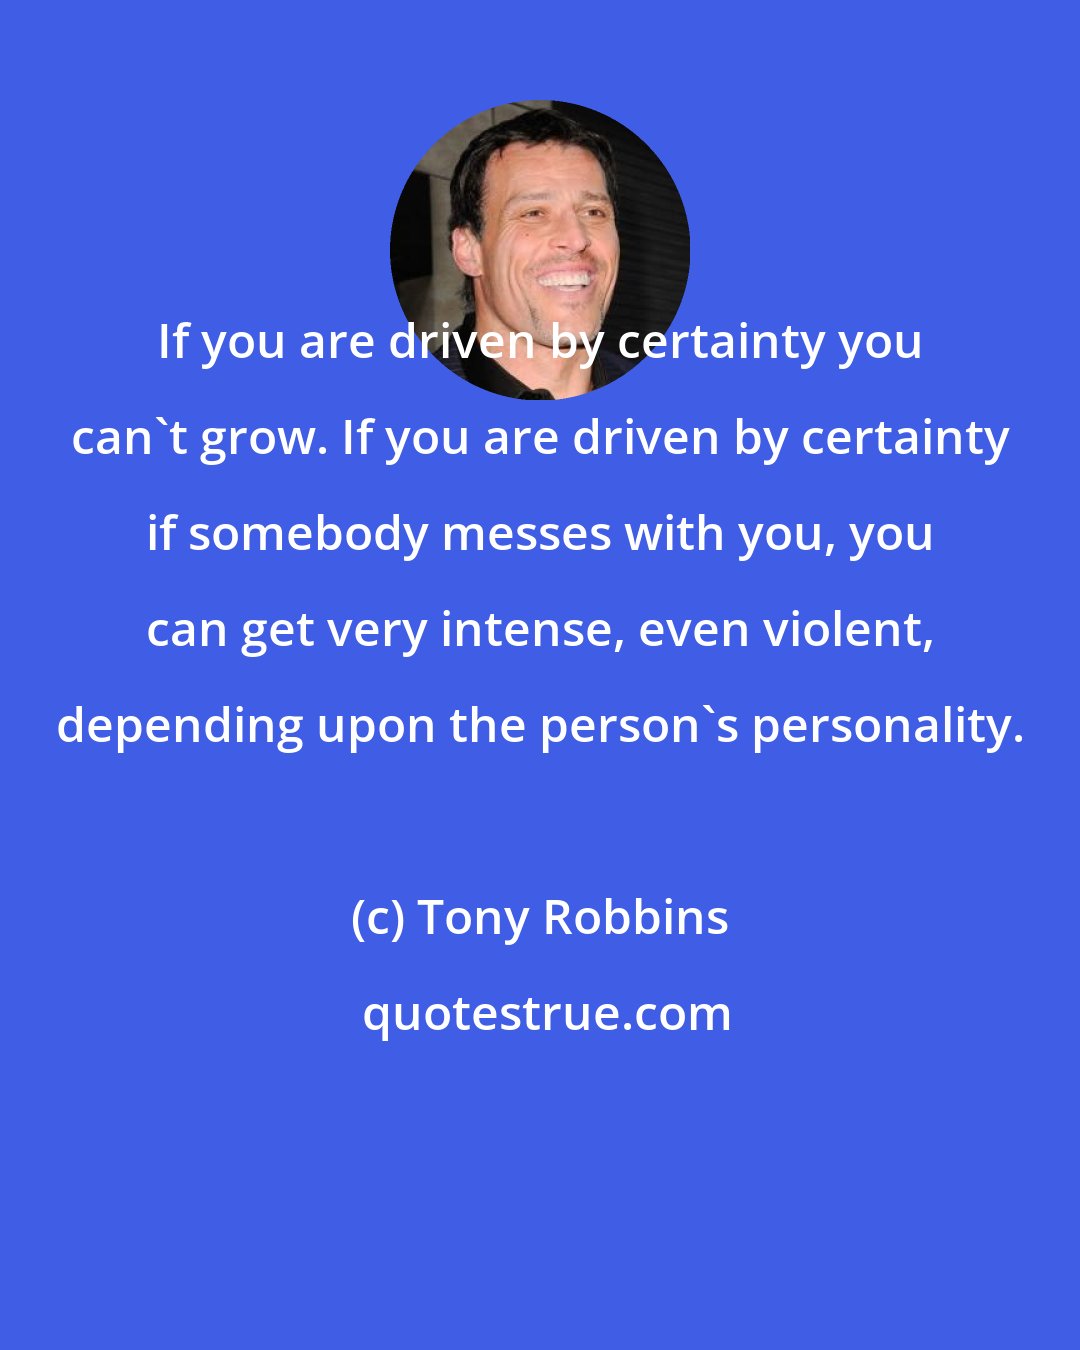 Tony Robbins: If you are driven by certainty you can't grow. If you are driven by certainty if somebody messes with you, you can get very intense, even violent, depending upon the person's personality.